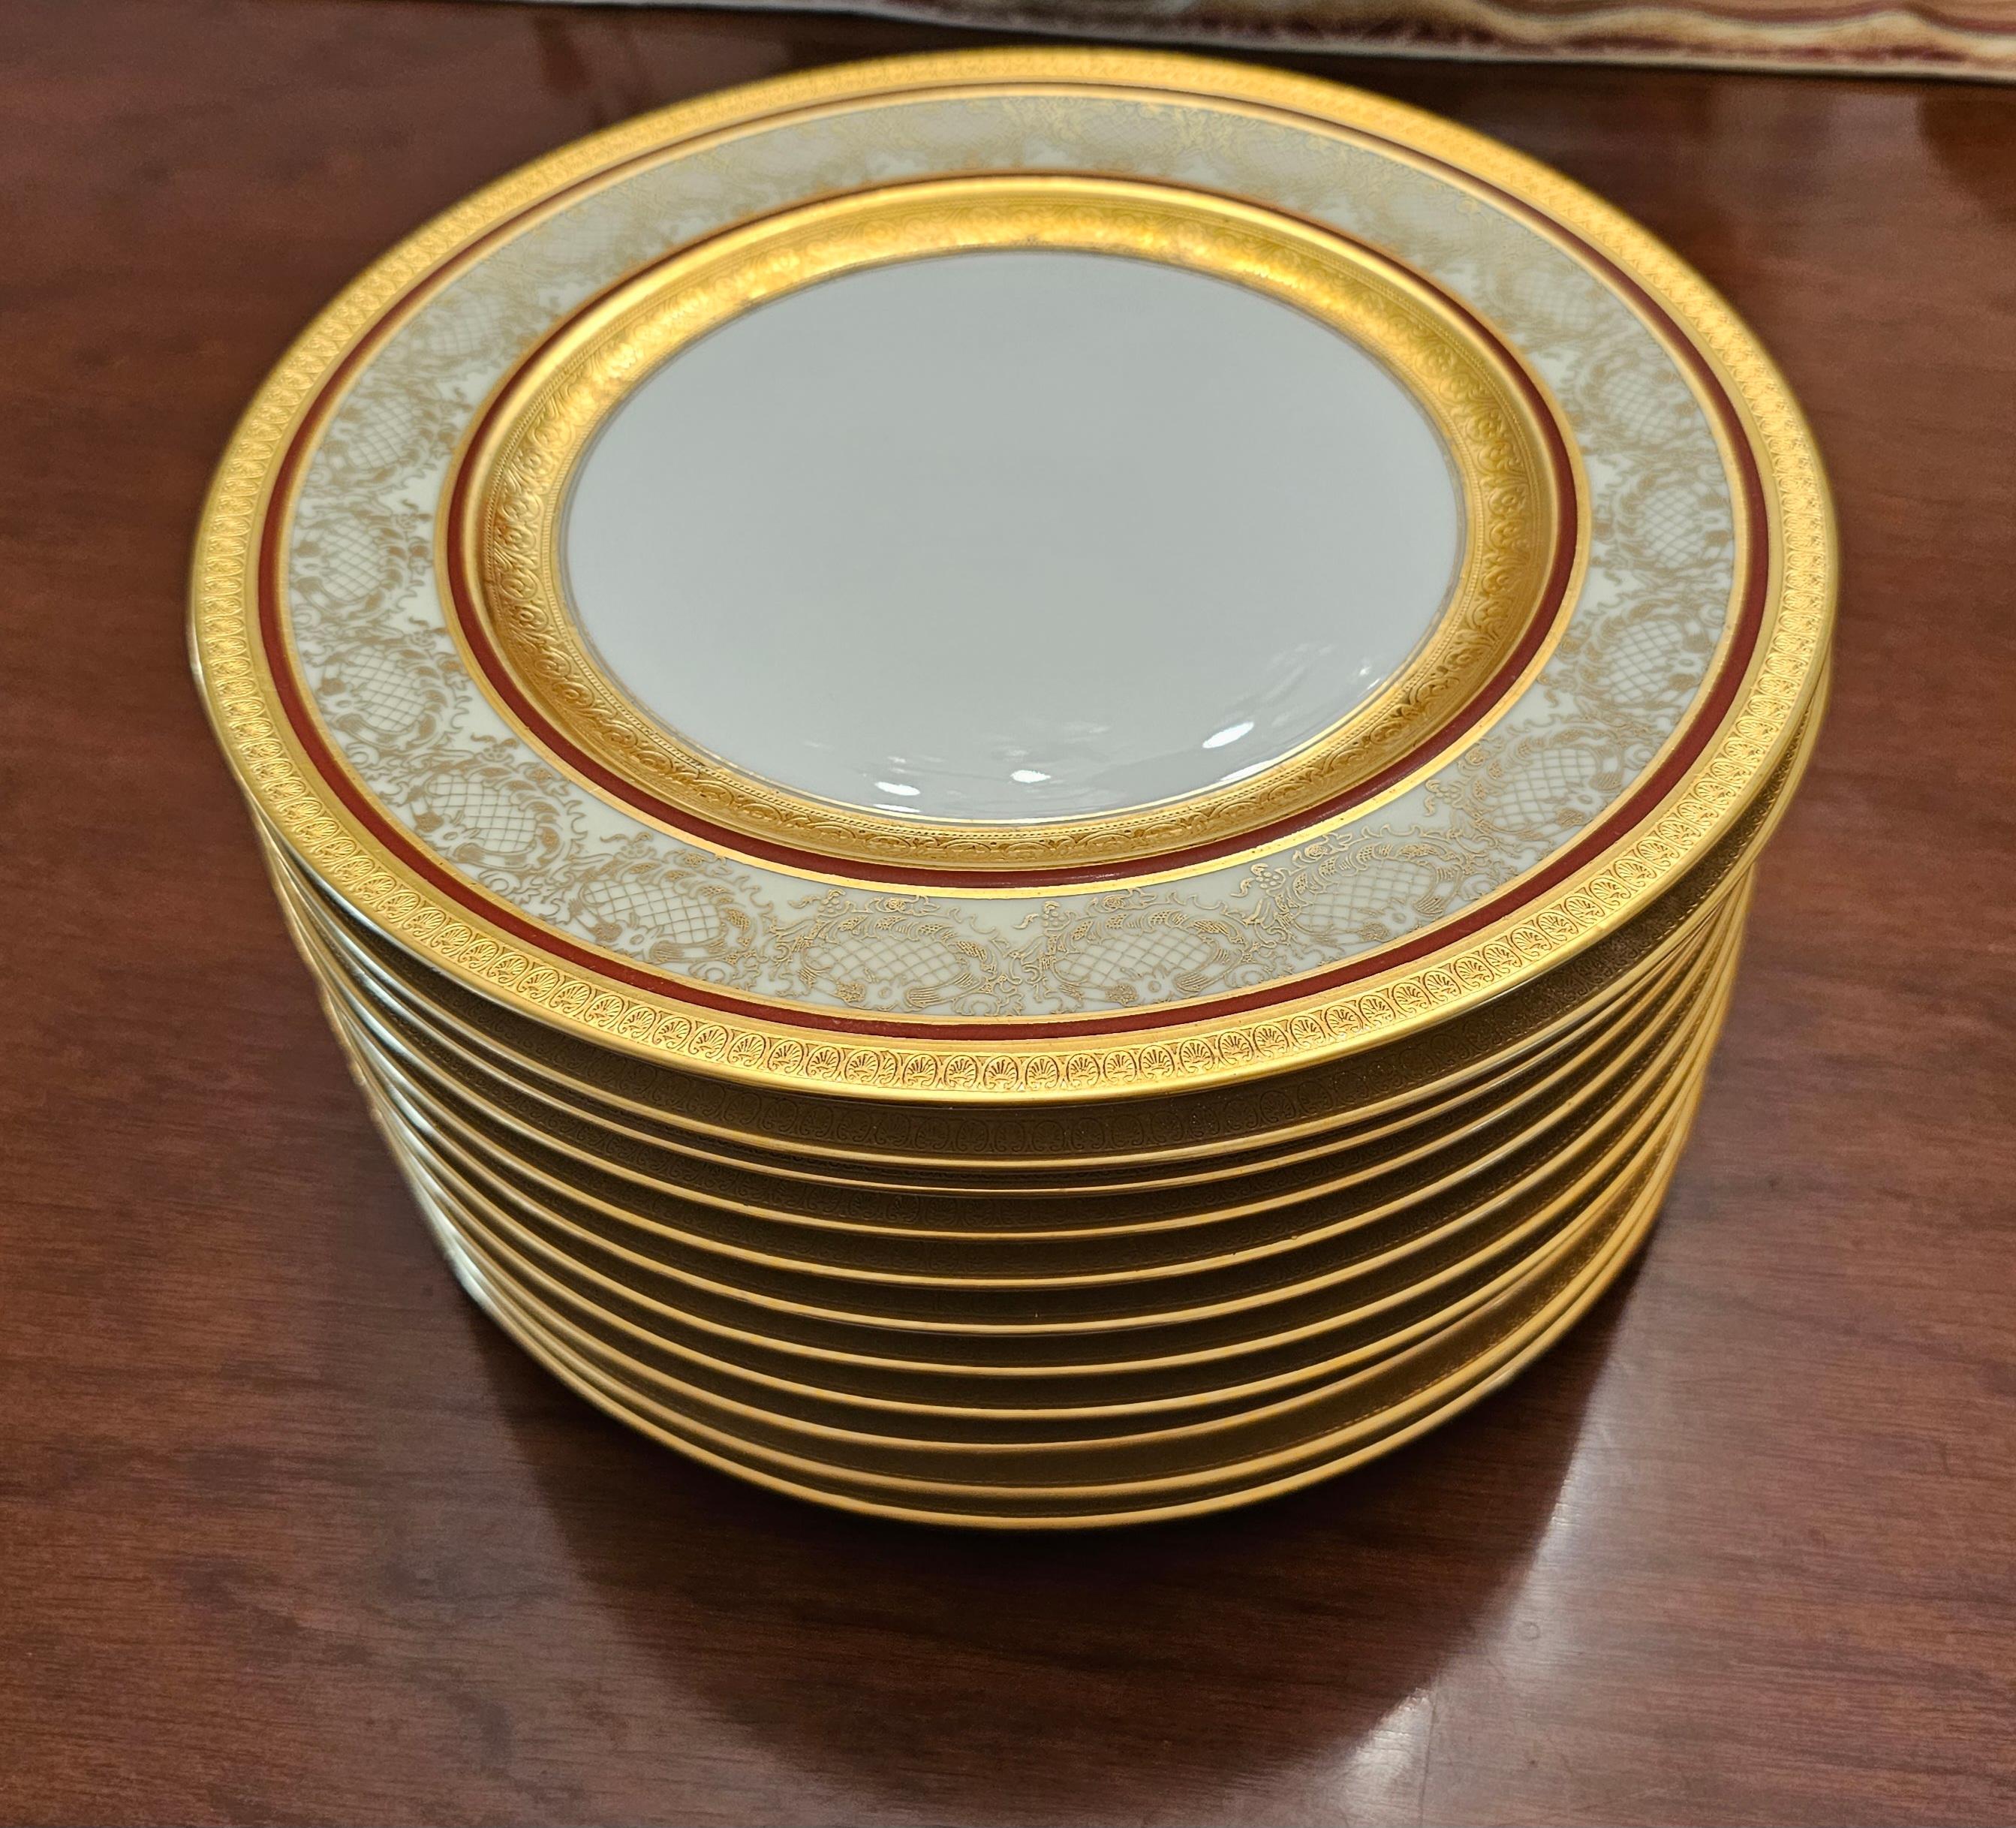 An exceptional set of 11 Heinrich Selb porcelain and gold encrusted dinner plates in white body in good antique condition.Listed price is for the set of 11. and not per item
Measure 11 inches in diameter and 1 inch in height.